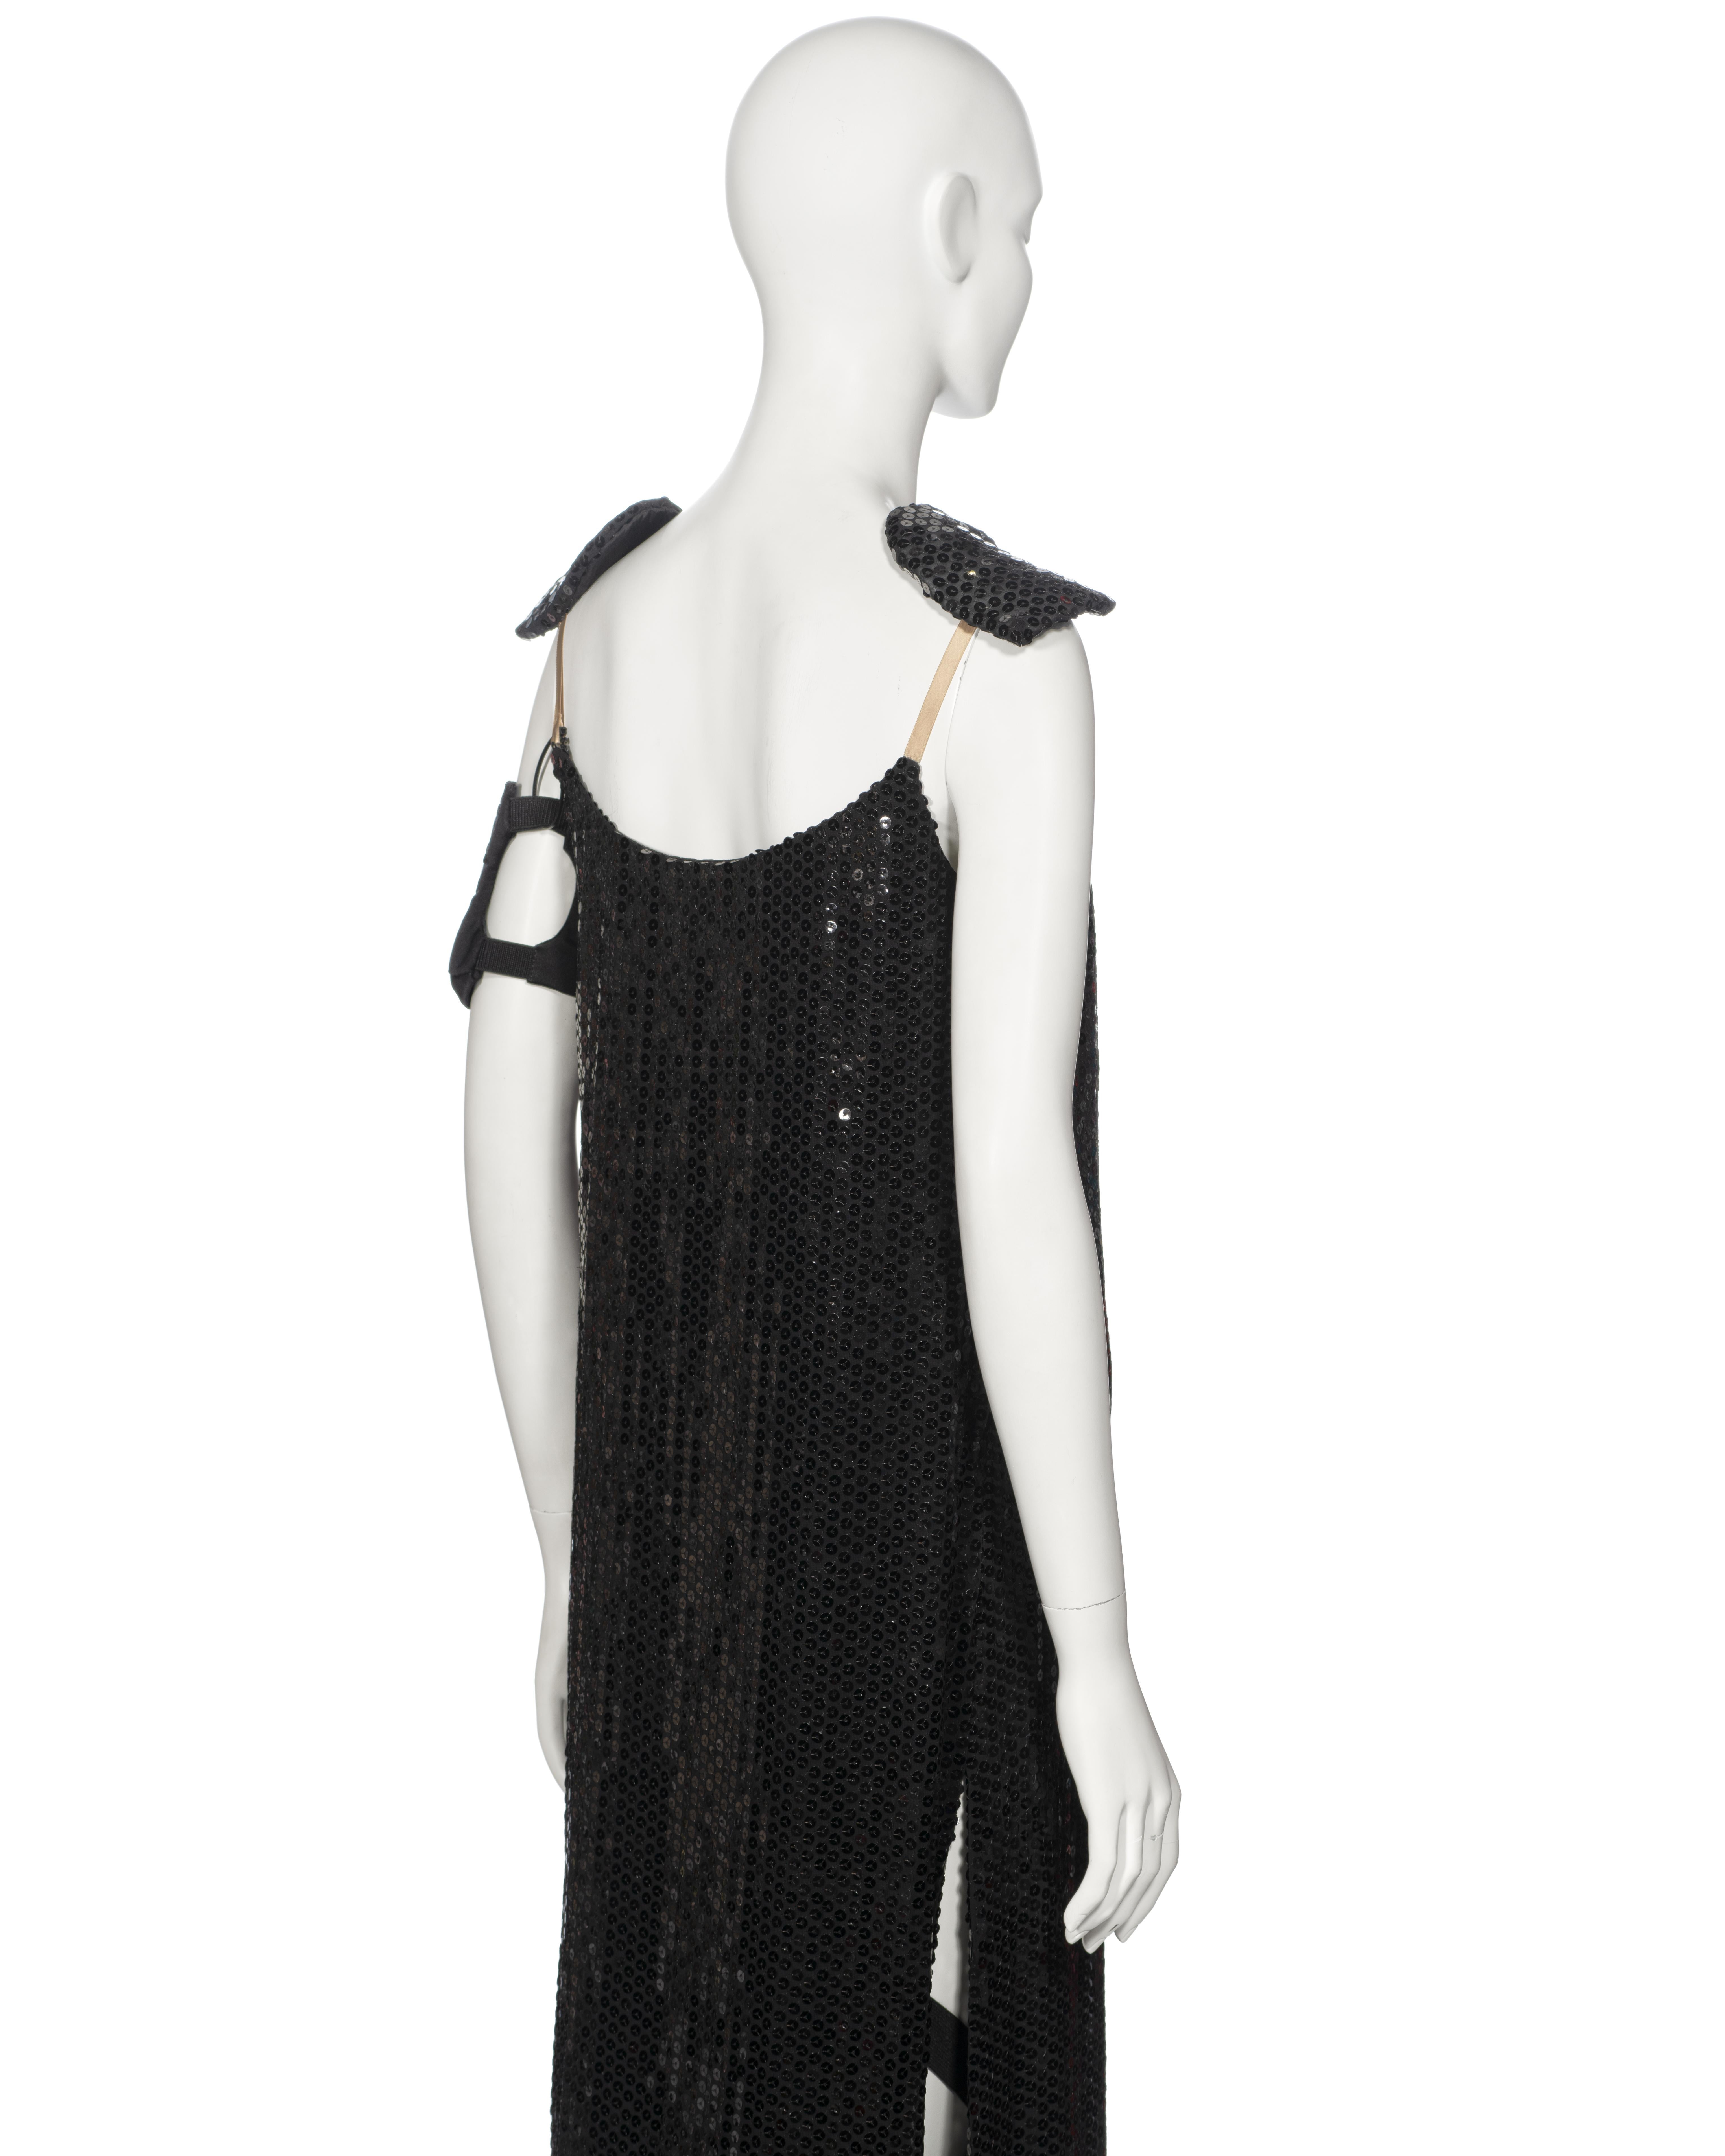 Helmut Lang Black Sequin Evening Dress With Armband, fw 1999 For Sale 10